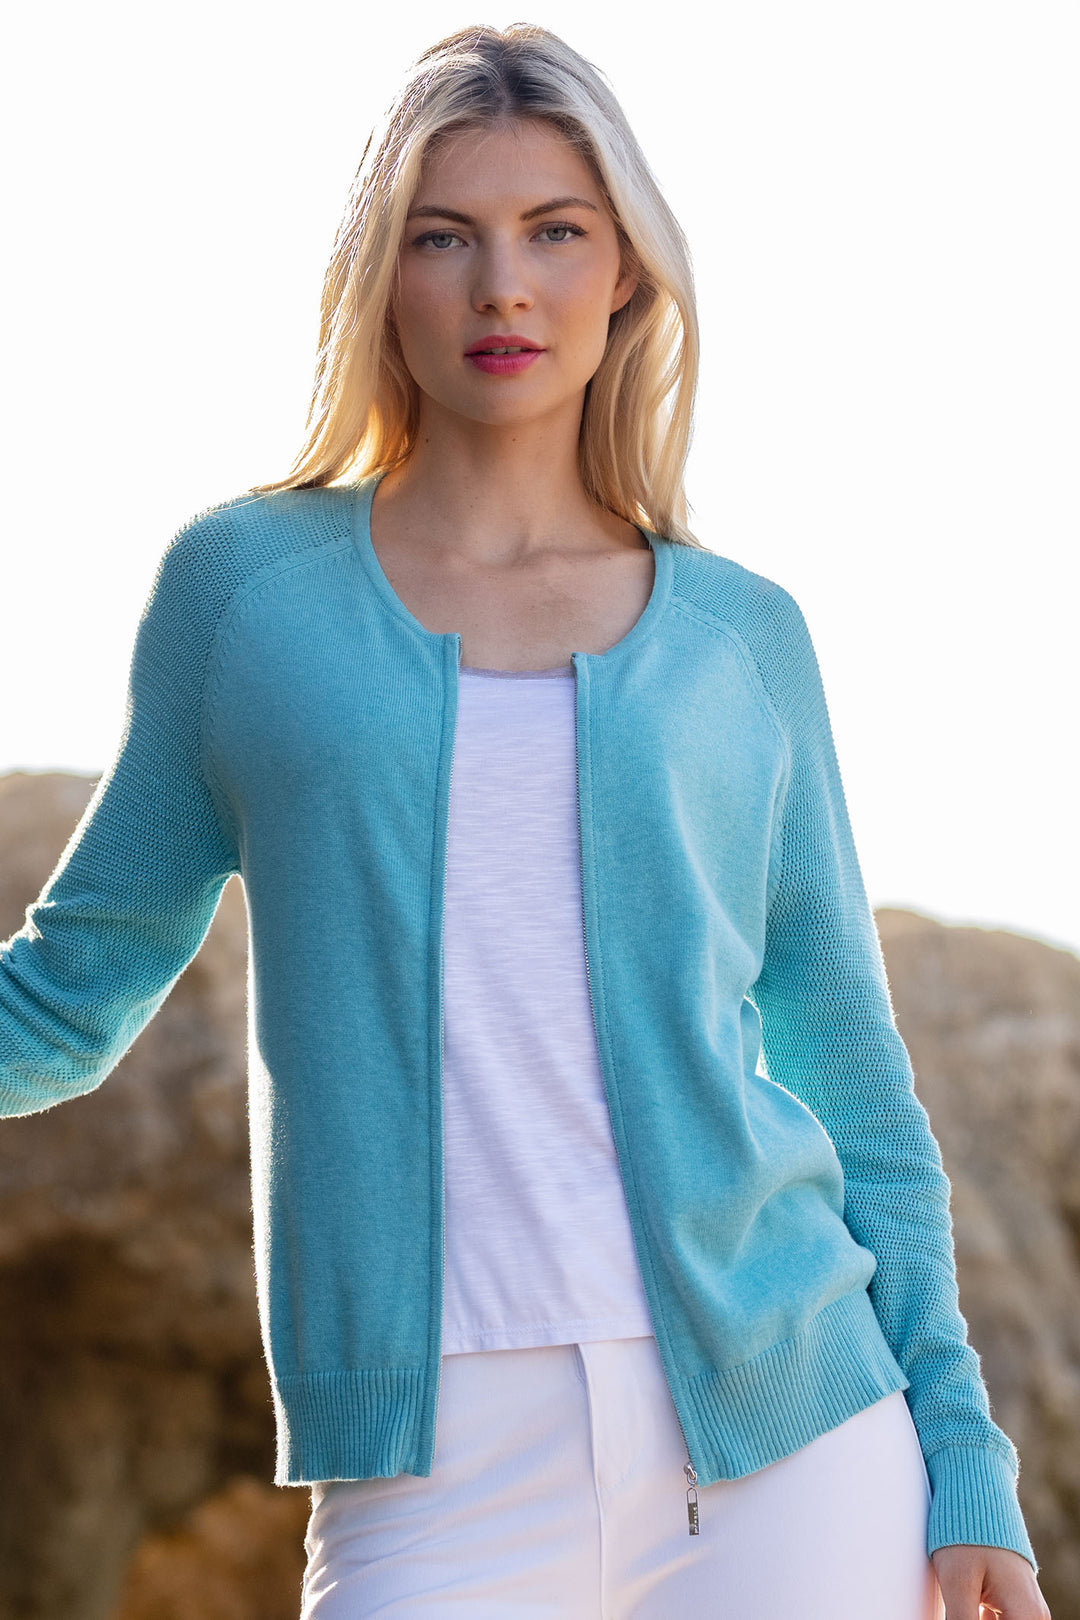 Marble Fashions 7354 151 Aqua Blue Zip Front Cardigan - Experience Boutique